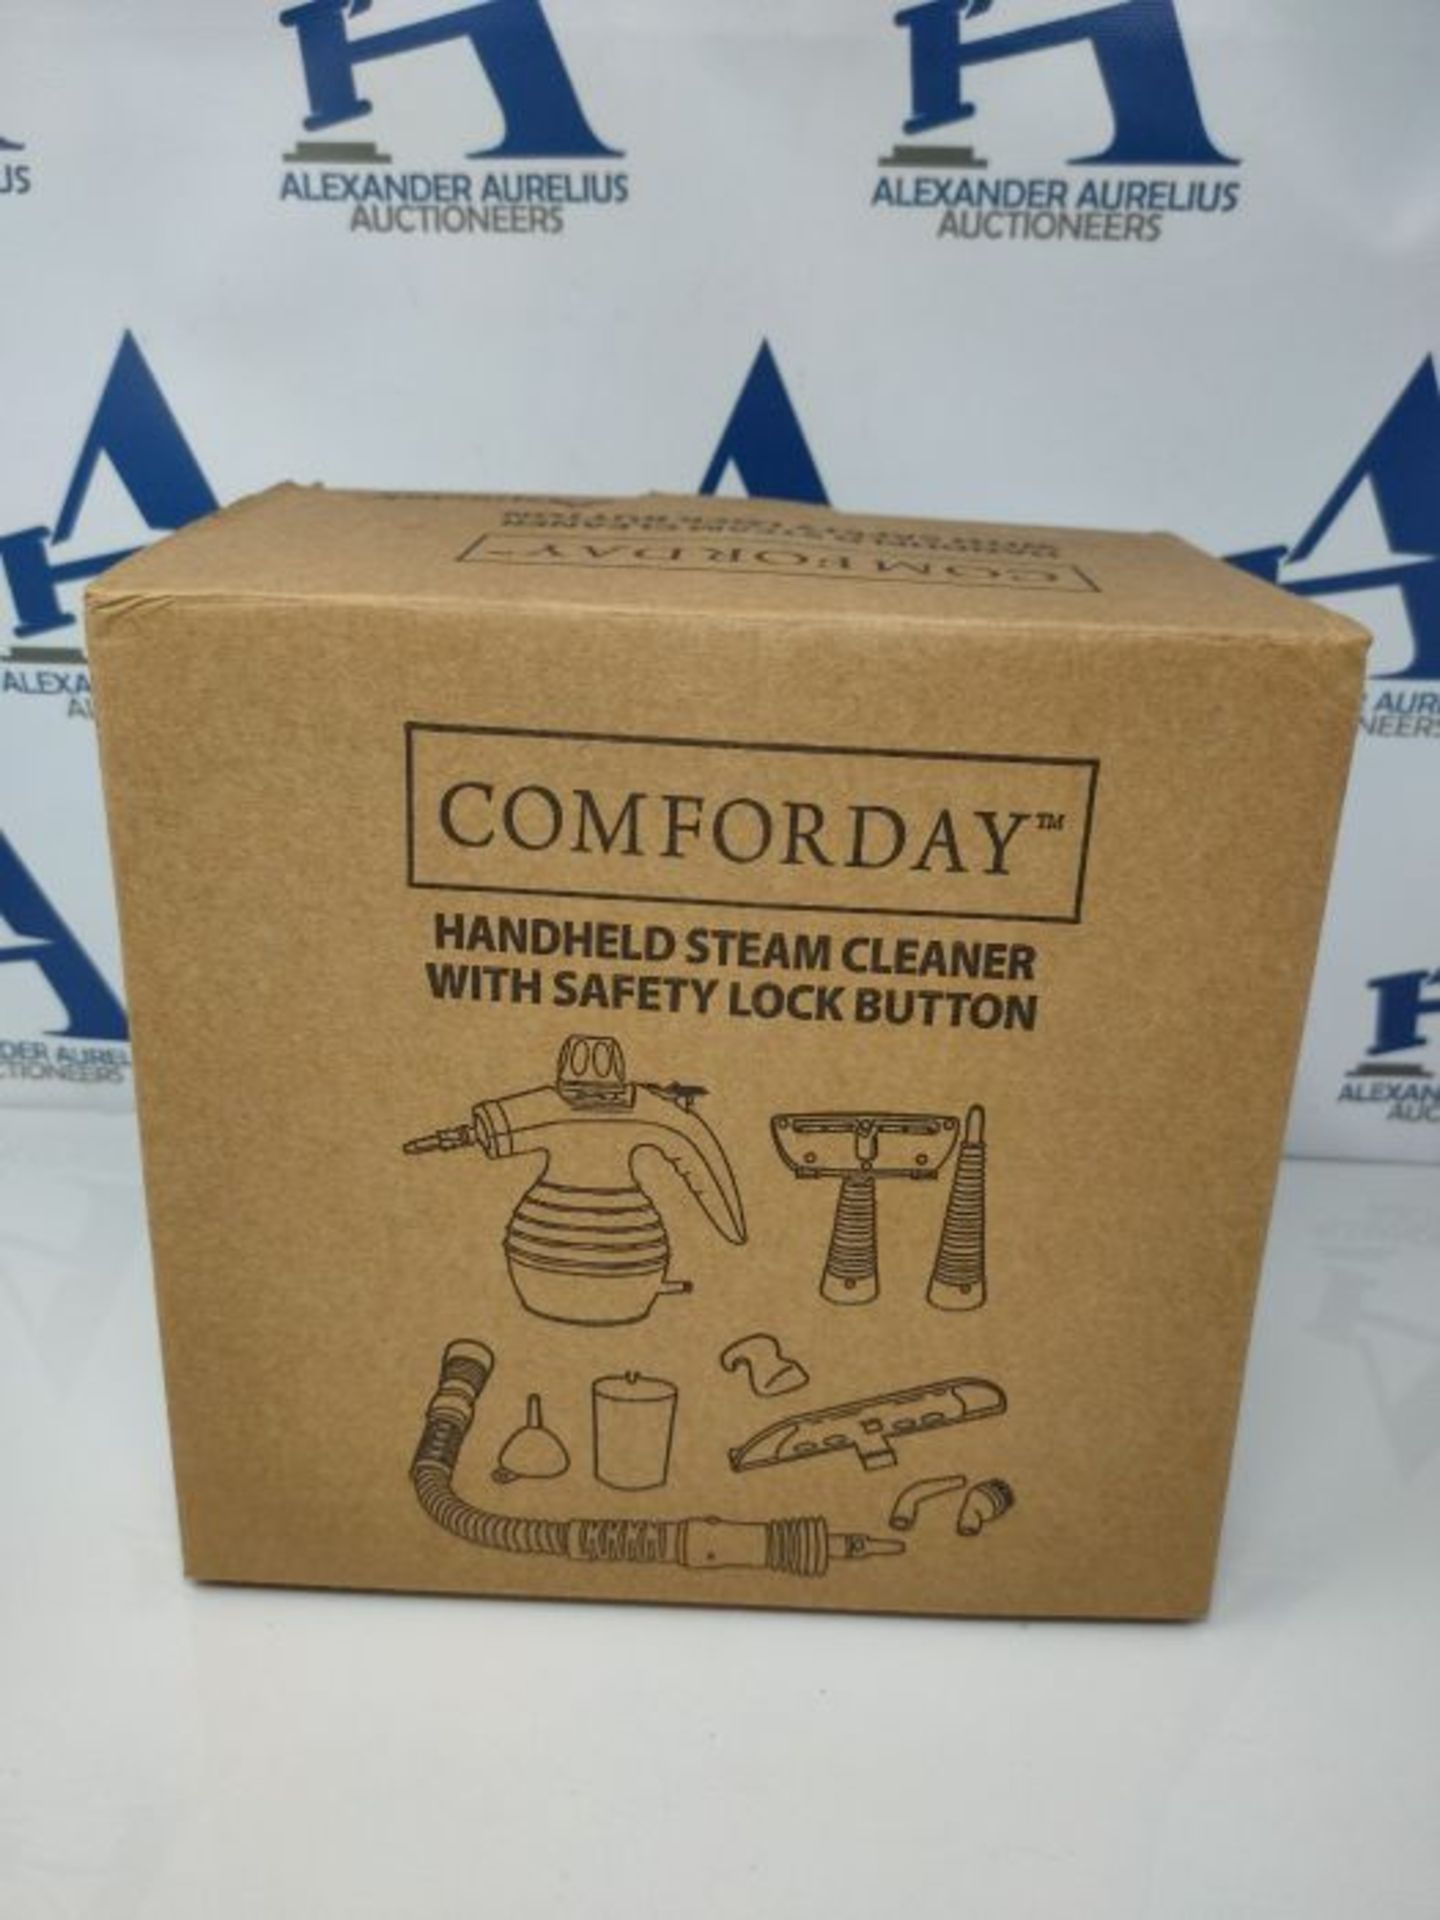 Comforday Multi-Purpose Handheld Steam Cleaner 9-Piece Accessories for Multi-Surface S - Image 2 of 3